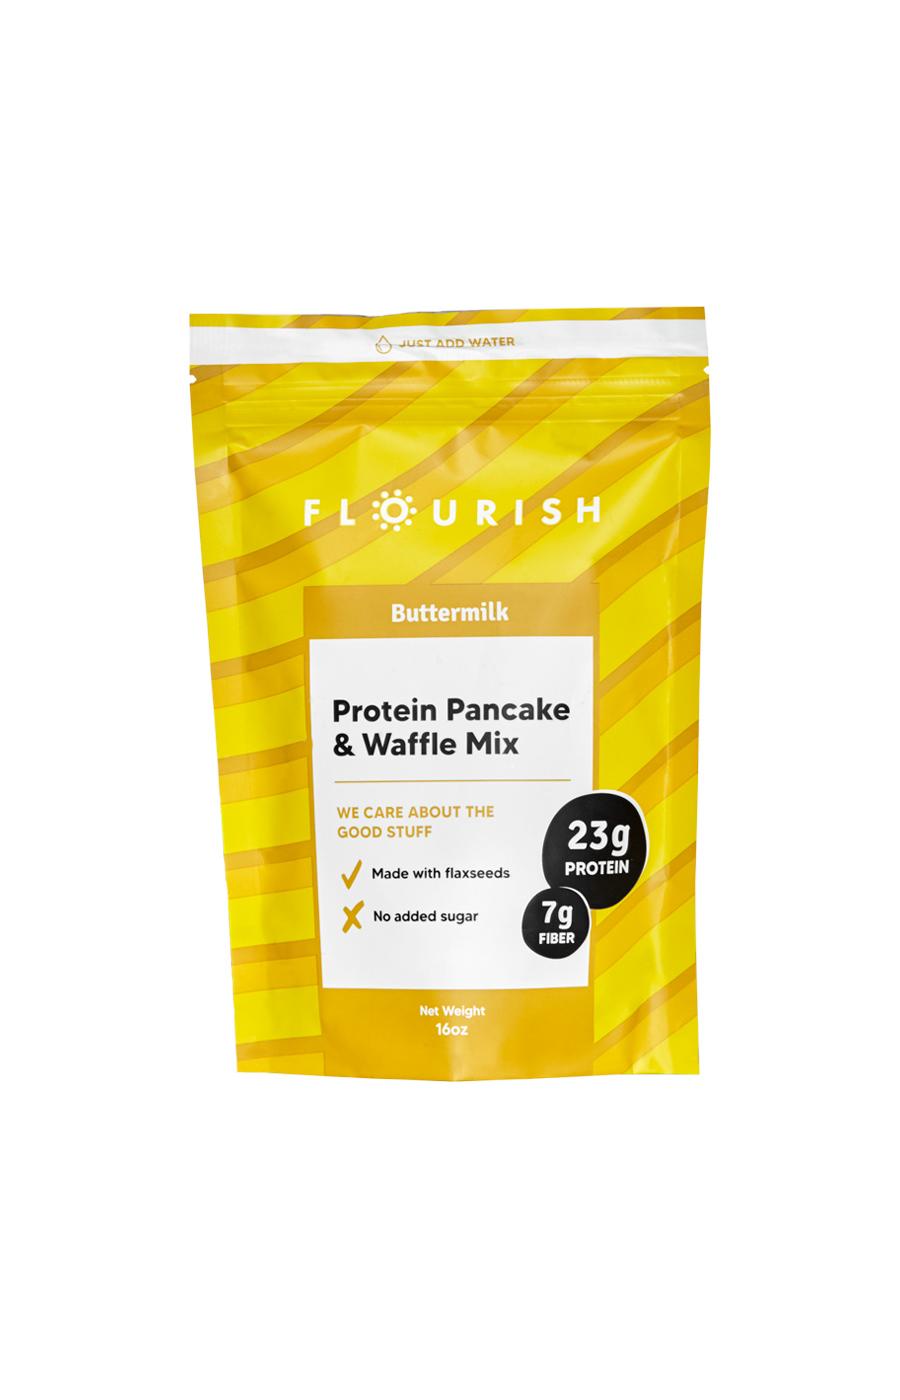 Protein Pancake and Waffle Mix - Happy Day Brands